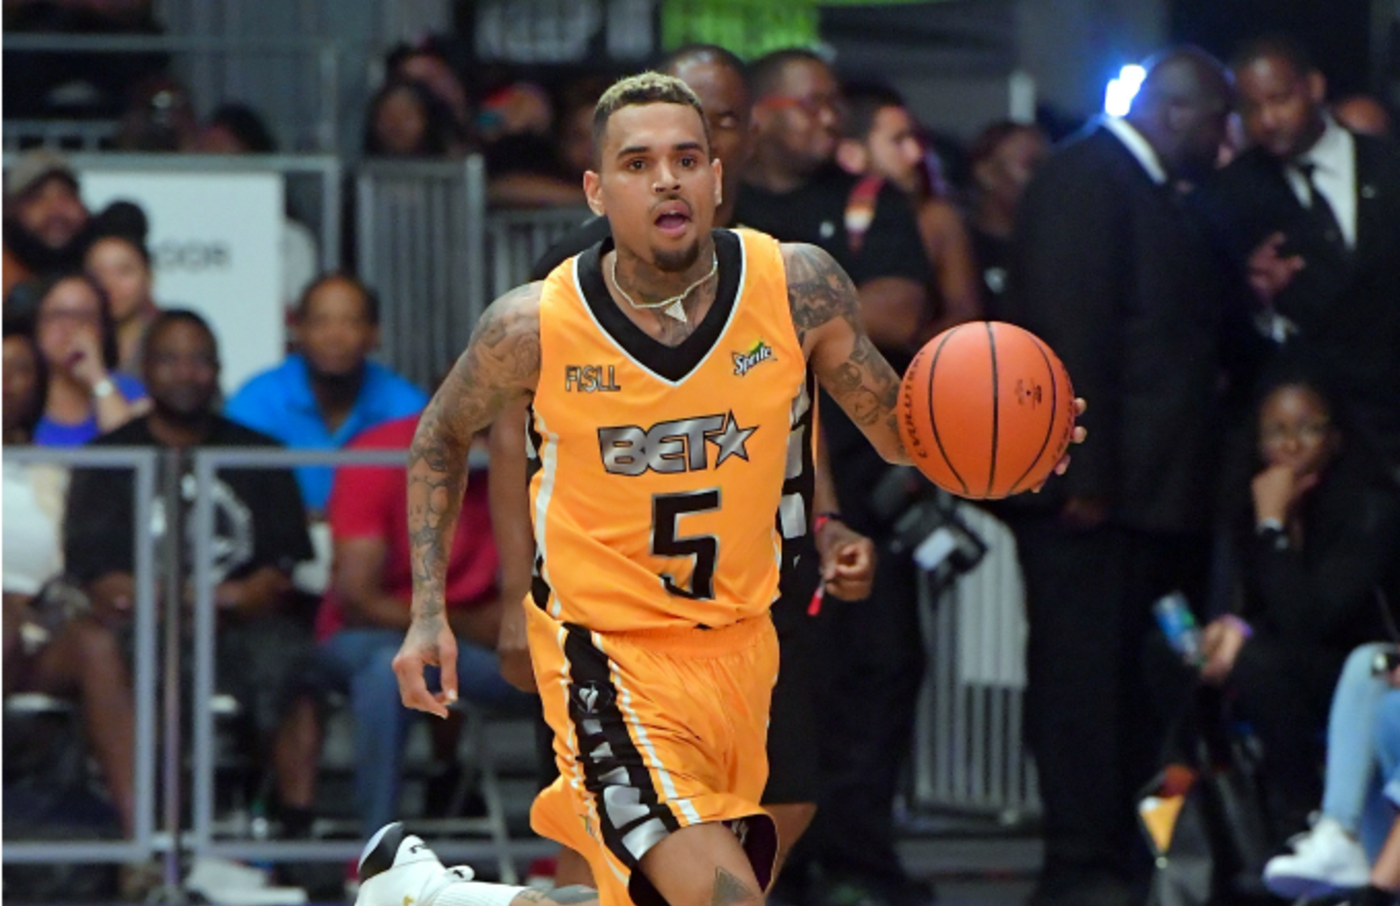 Singer Chris Brown attends the Celebrity Basketball Game